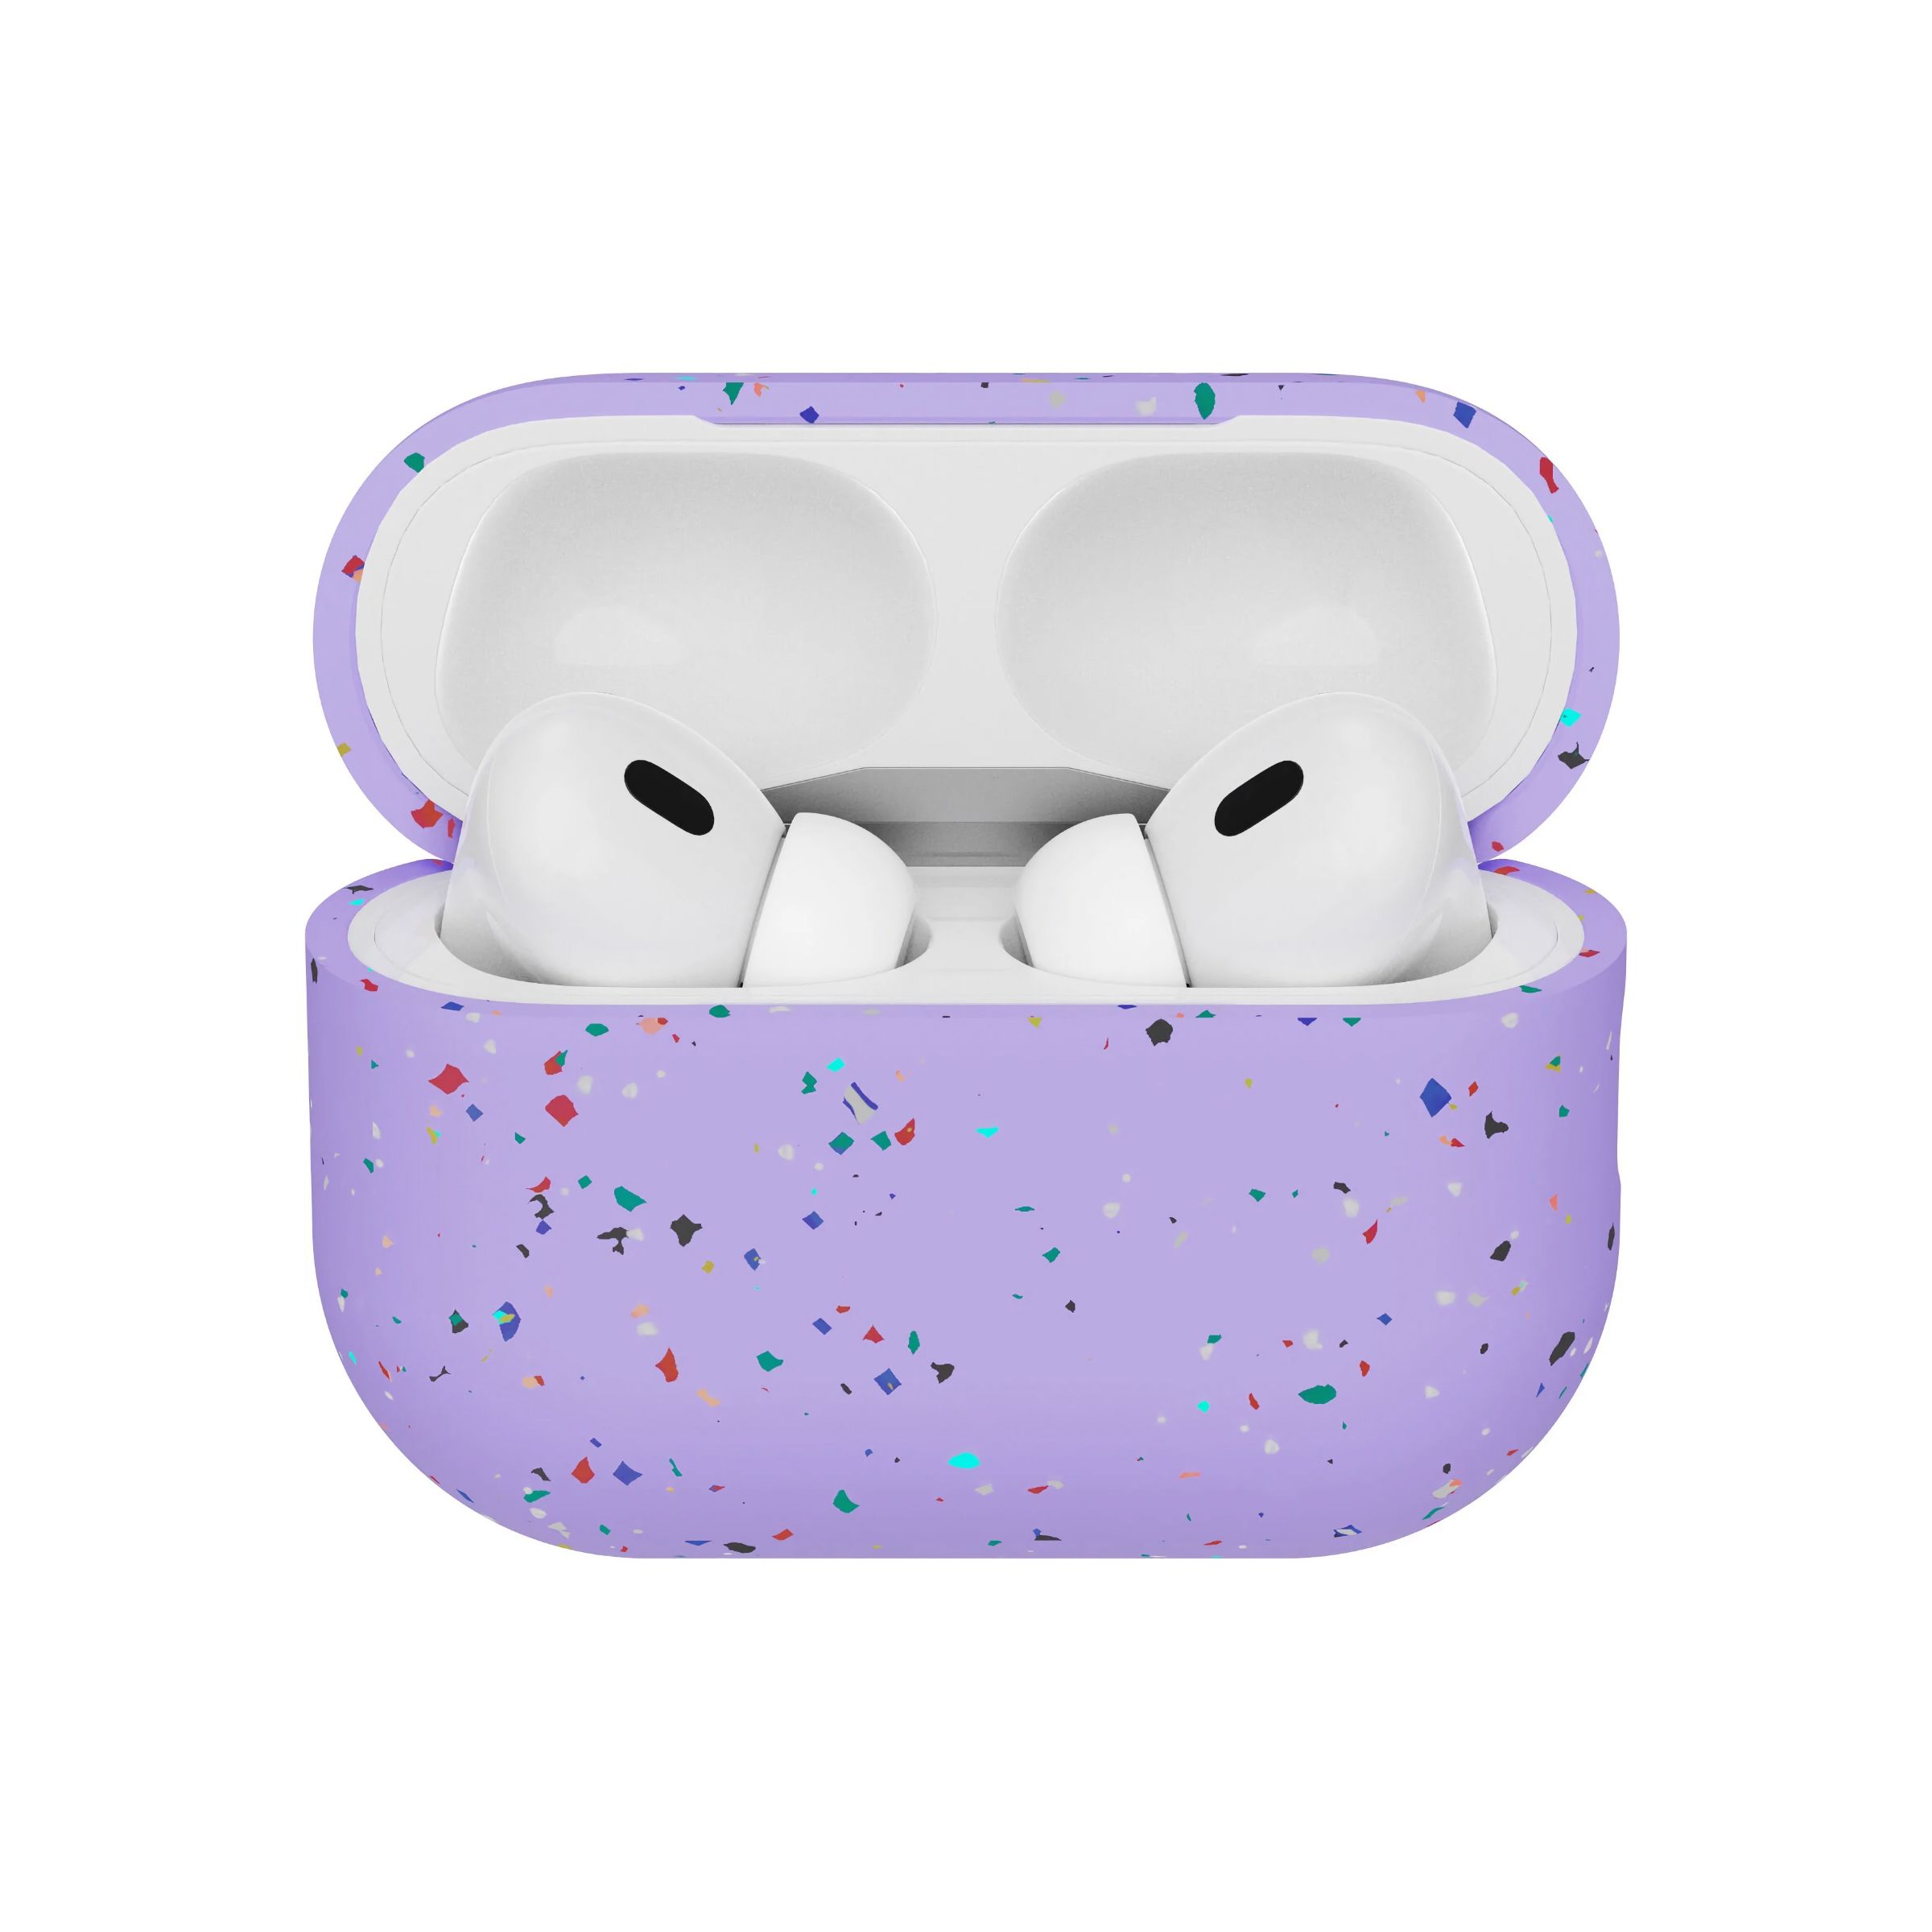 A purple speckled case on an AirPods Pro case that's open.